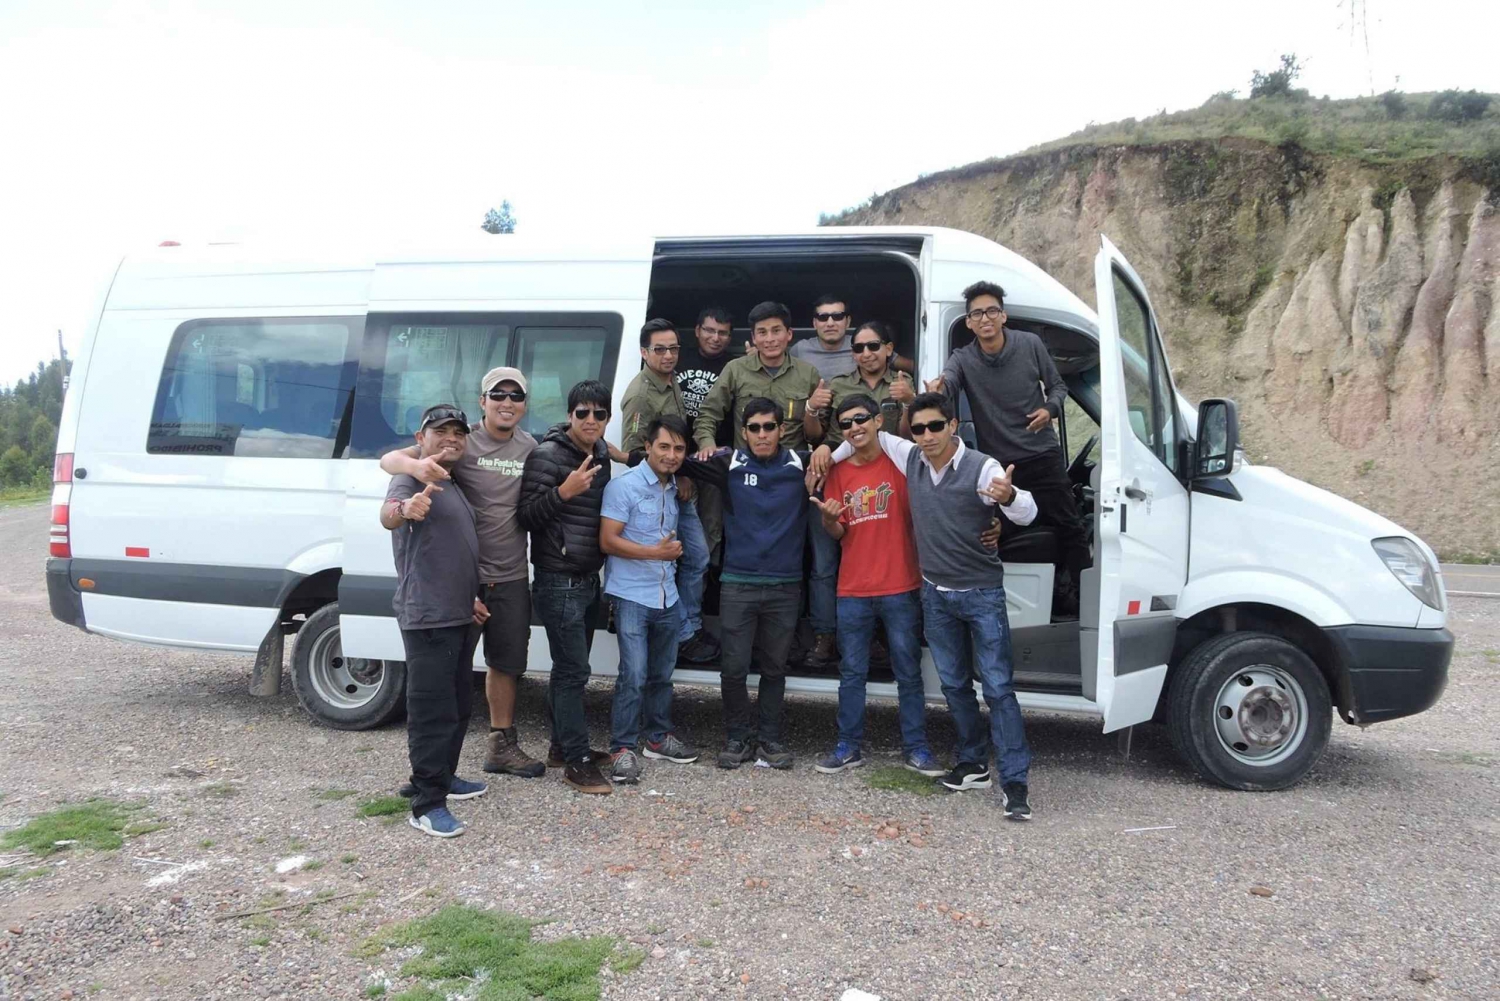 From Cusco: Private Round-Trip Transfer to Apukunaq Tianan